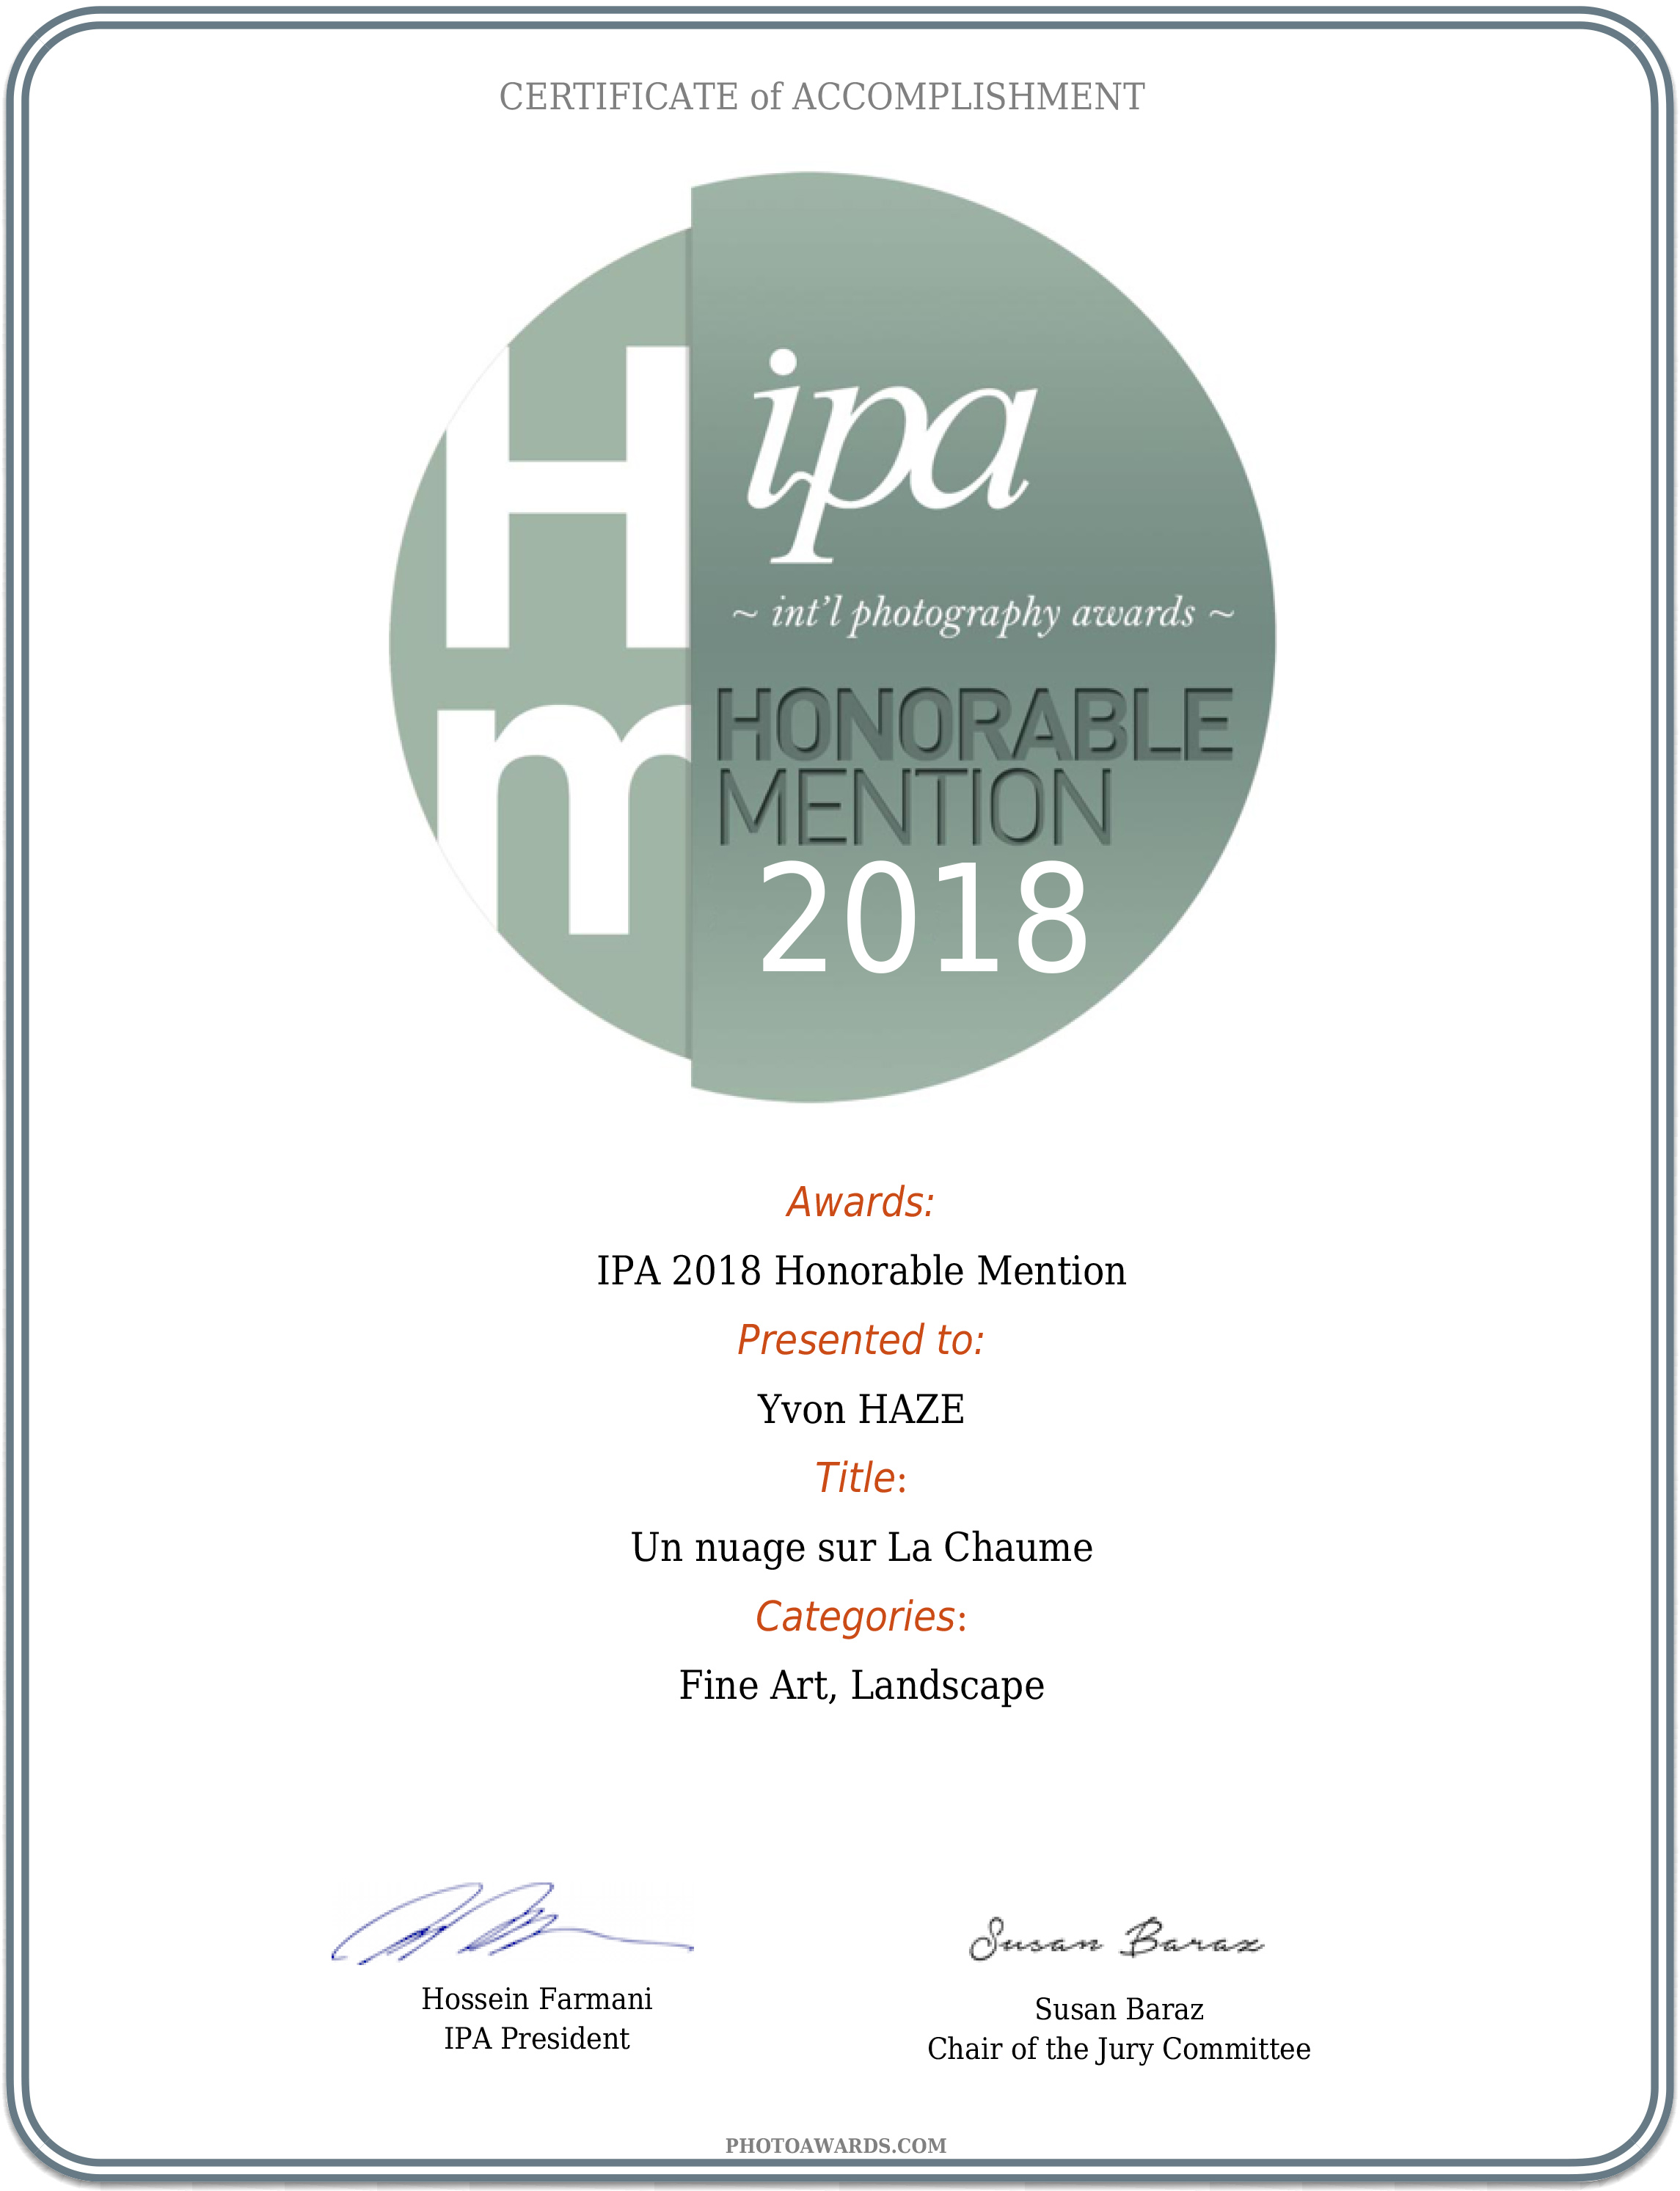 MENTION HONORABLE IPA 2018